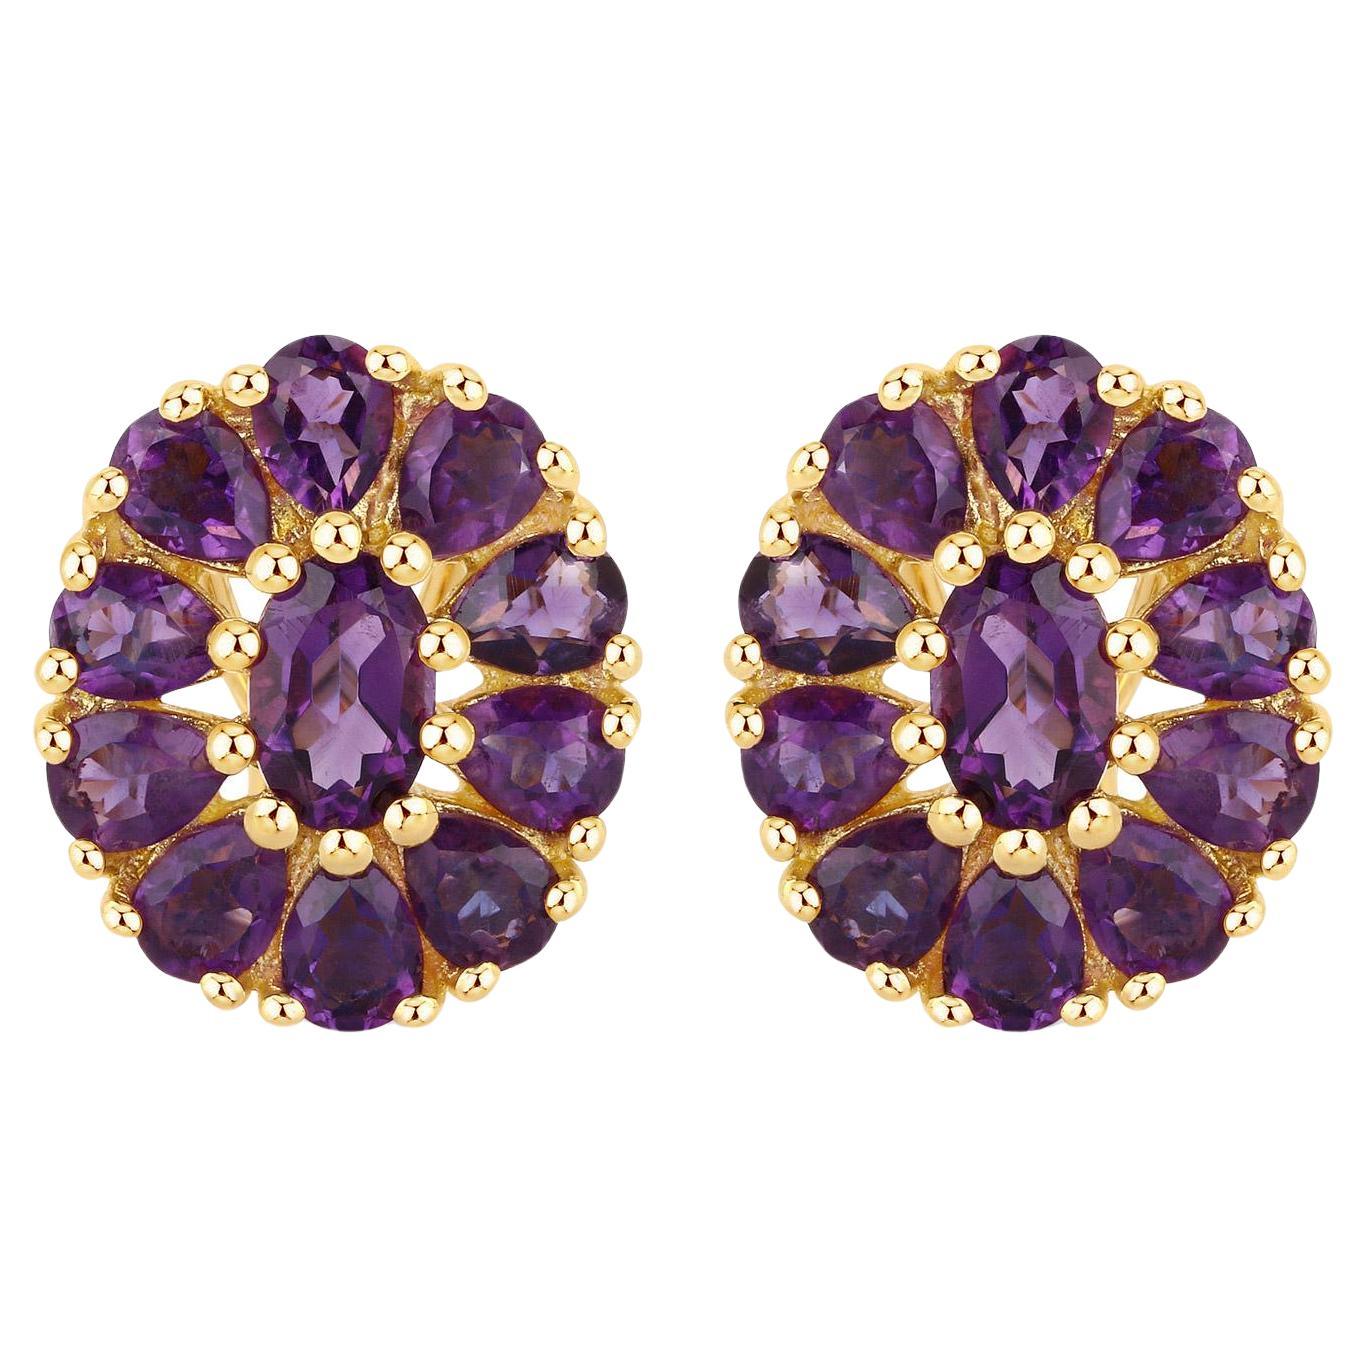 Natural Amethyst Floral Statement Earrings 3.8 Carats Total For Sale